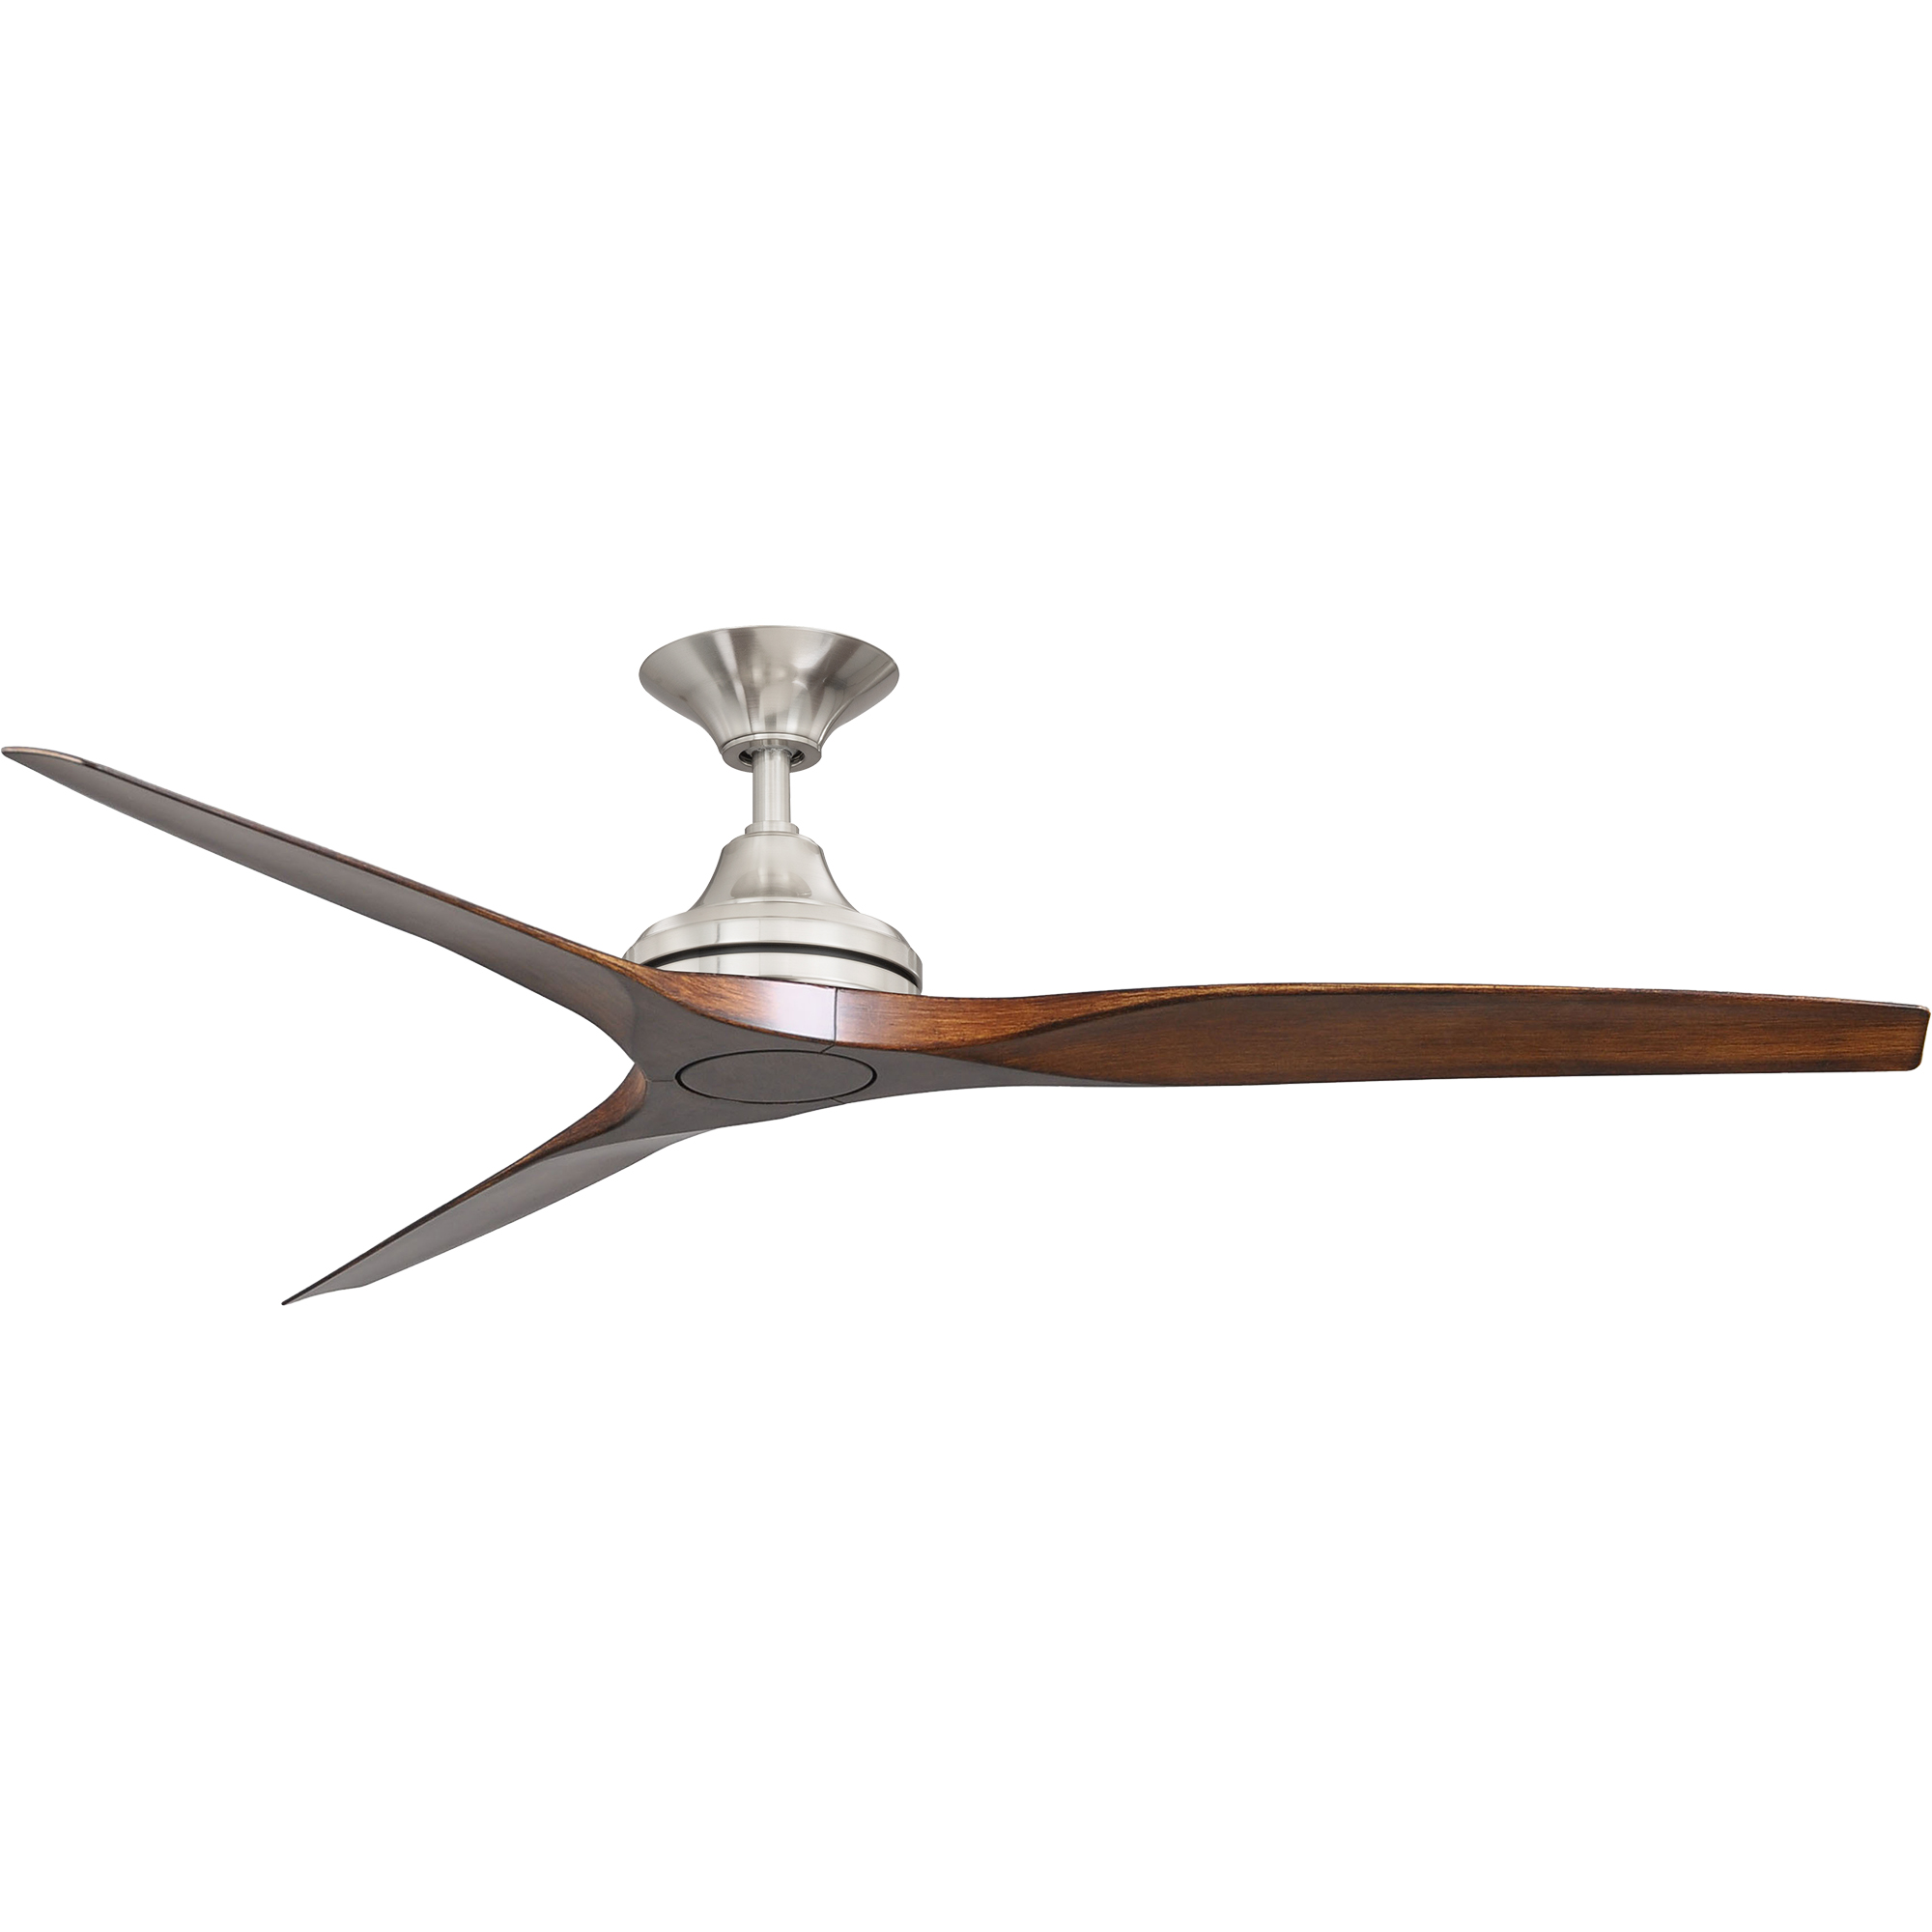 60" Spitfire ceiling fan in Brushed Nickel with Koa polymer blades